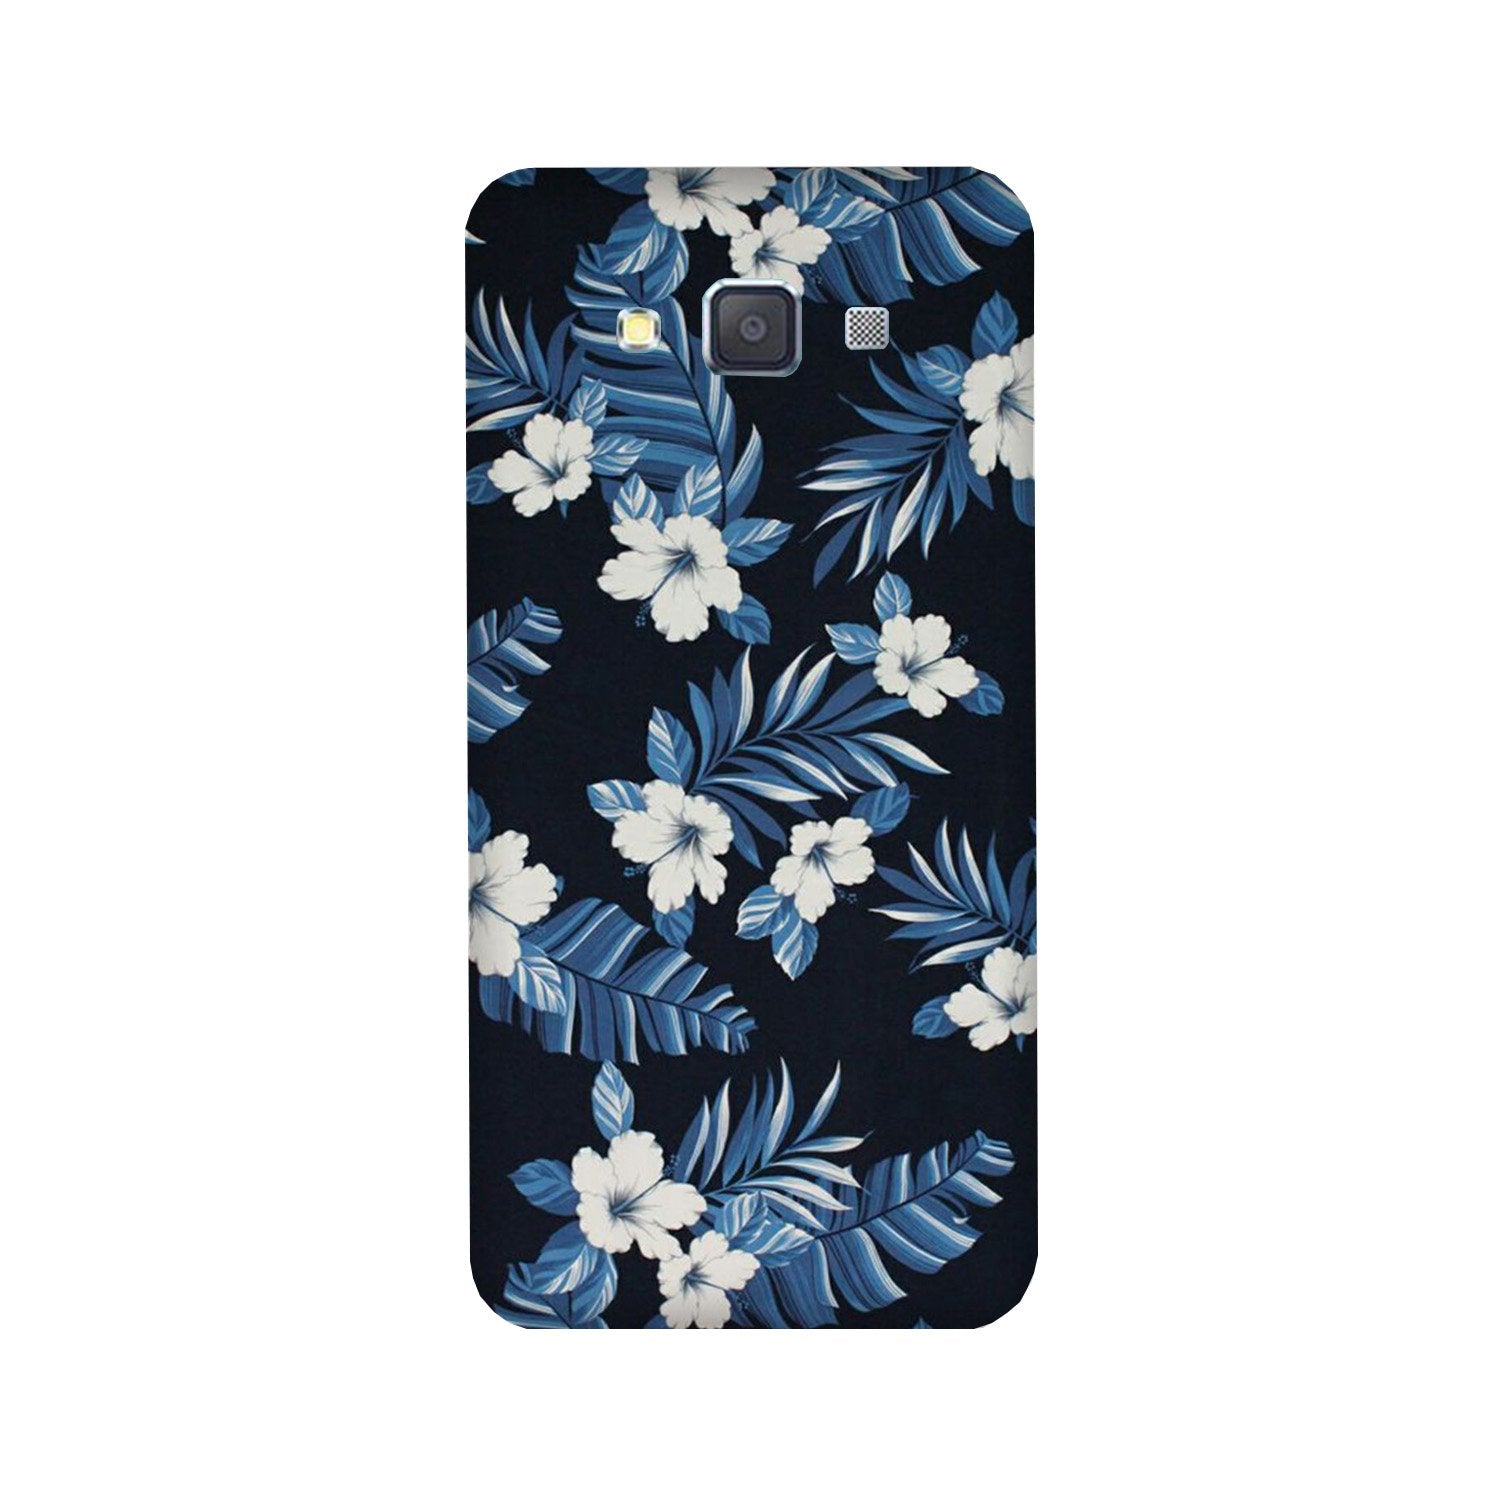 White flowers Blue Background2 Case for Galaxy Grand Prime